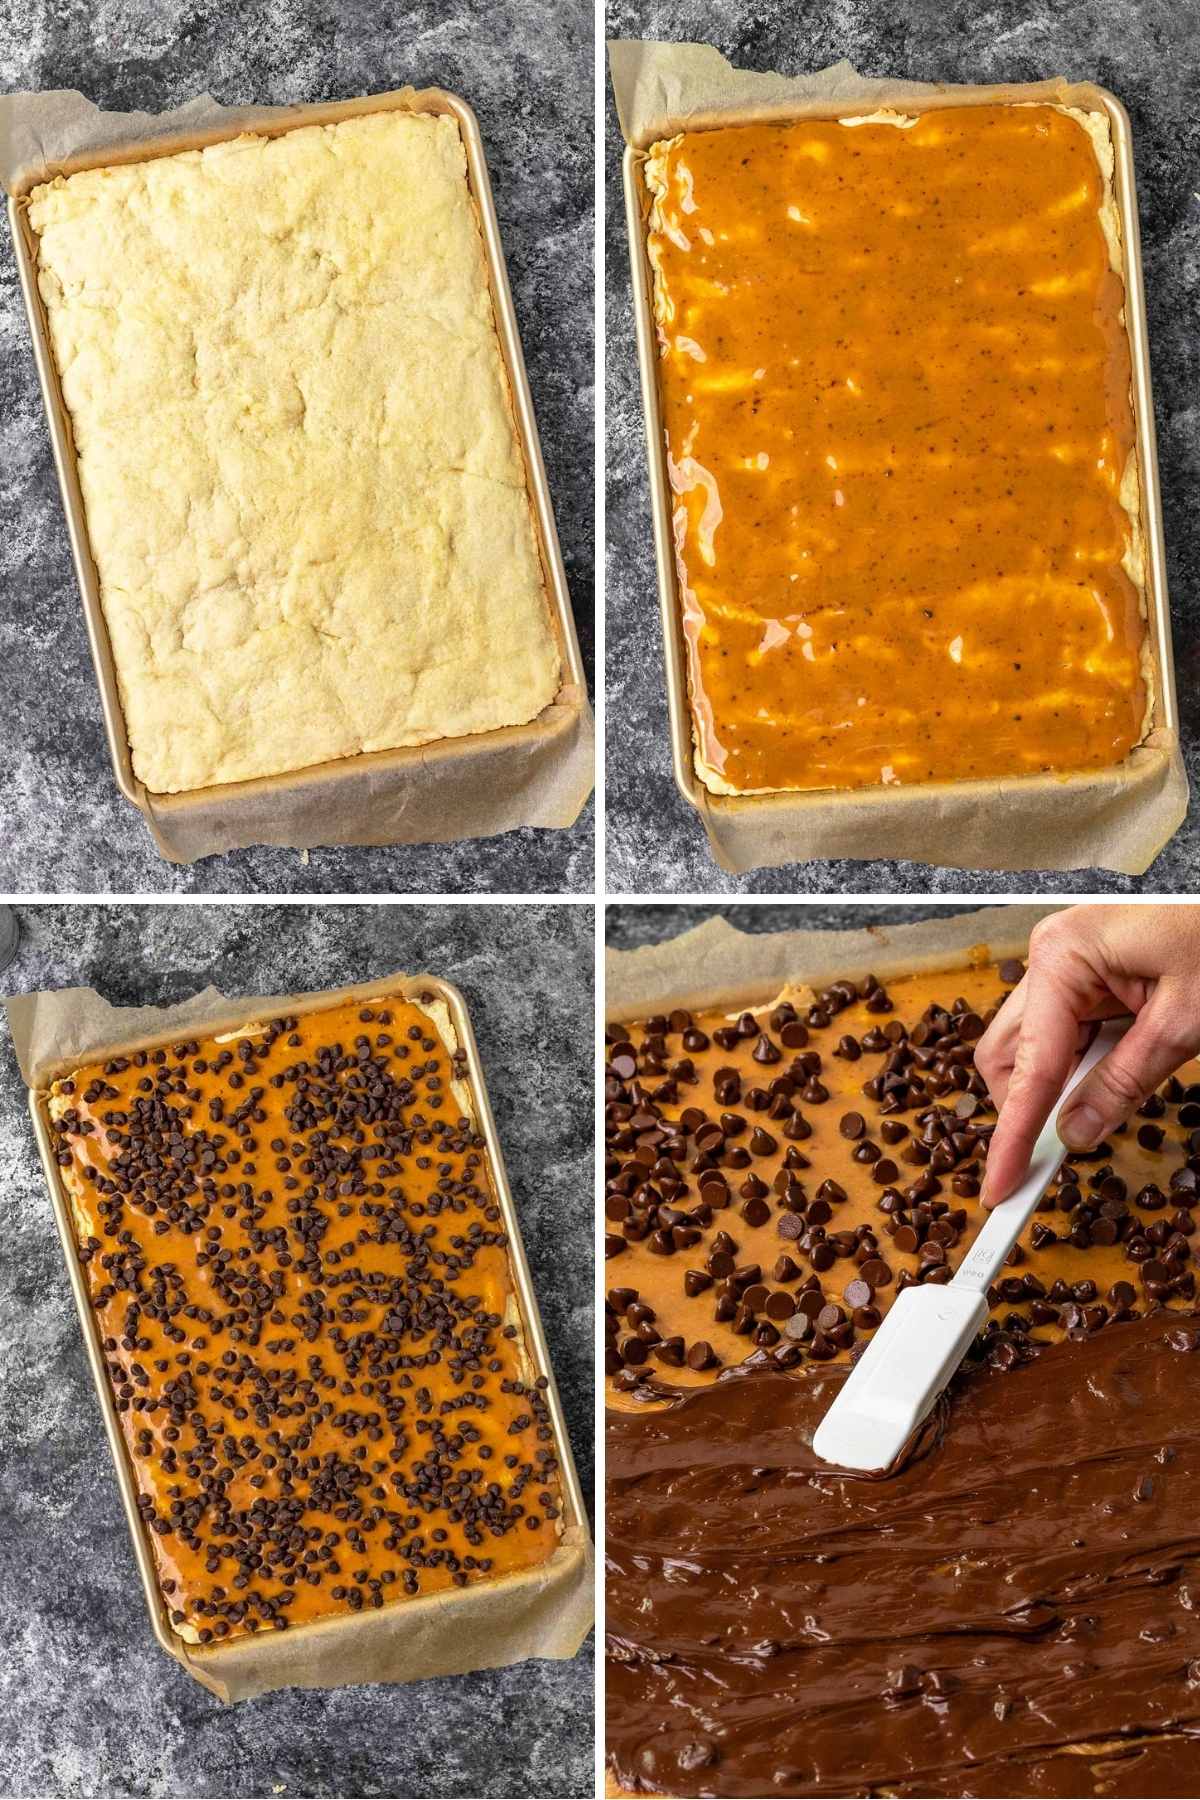 Salted Toffee Cookie Bars collage